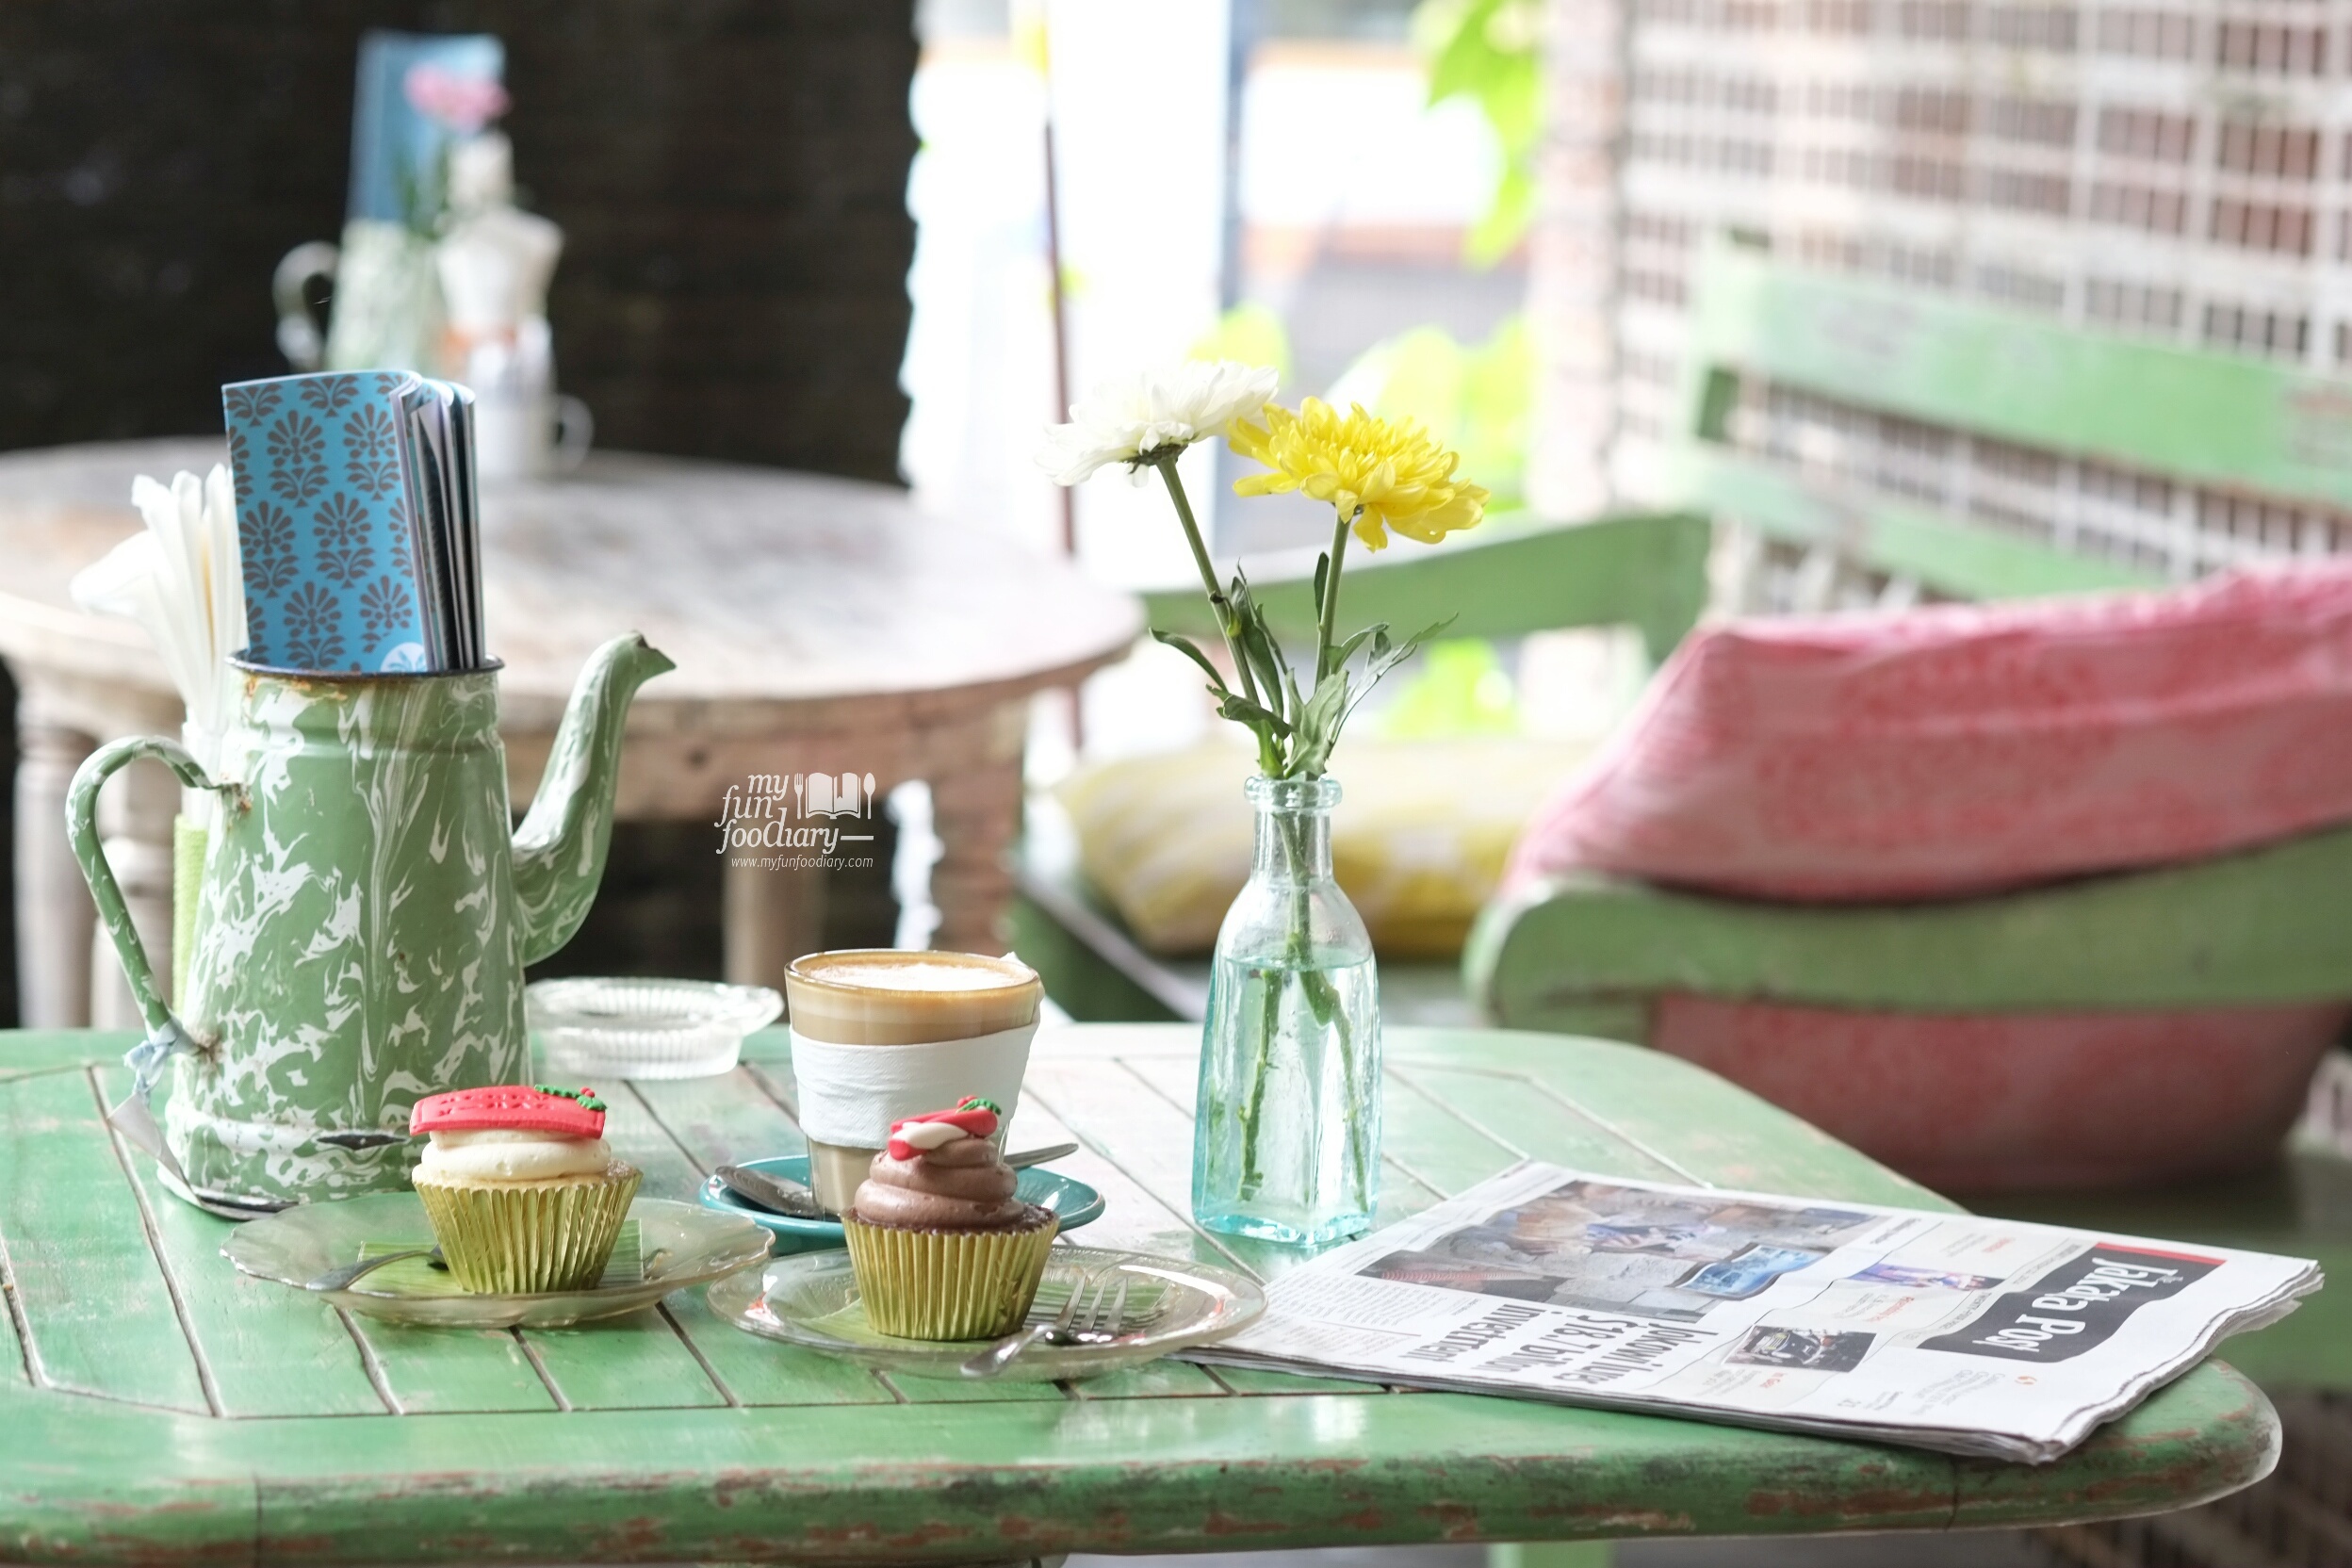 Cupcakes and Coffee at Bungalow Living Cafe Bali by Myfunfoodiary